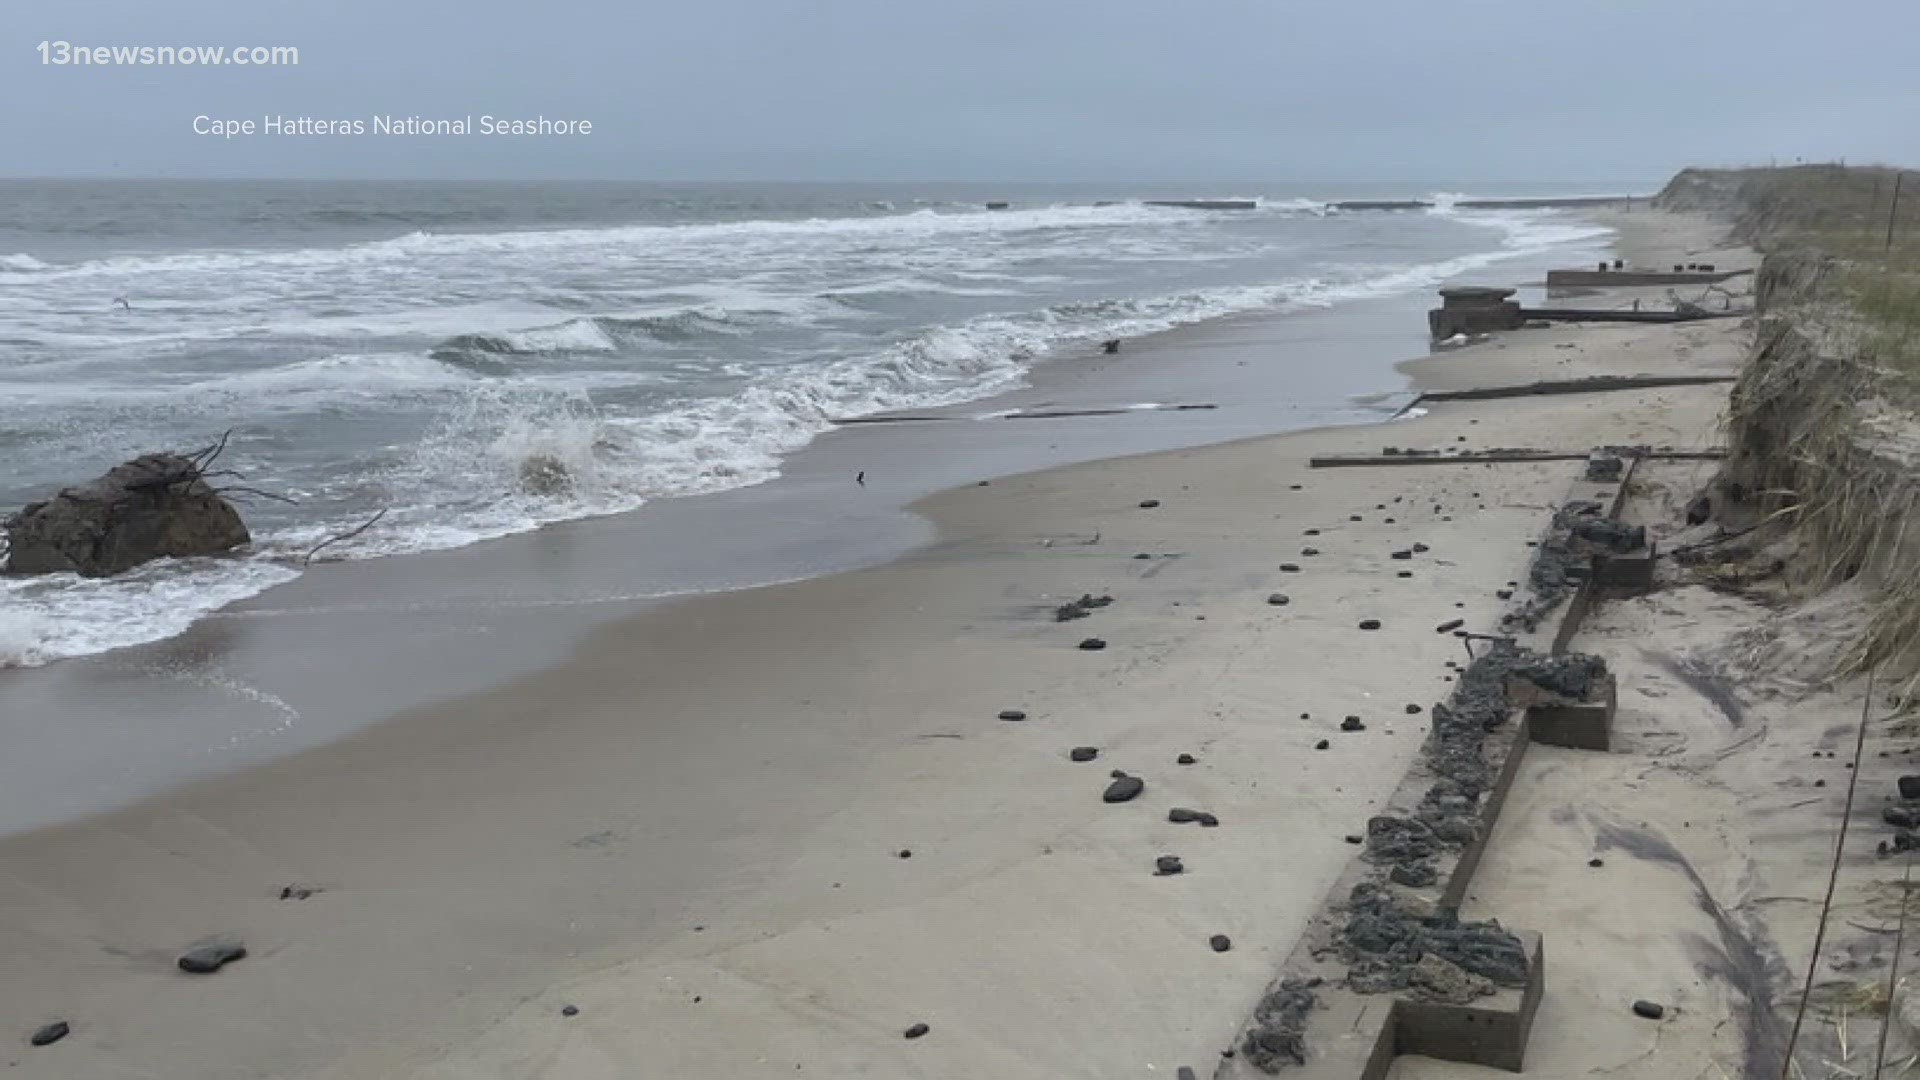 Work continues to clean up petroleum contamination on part of the beach in Buxton. Dare County officials voice concerns over possible tourism impacts.